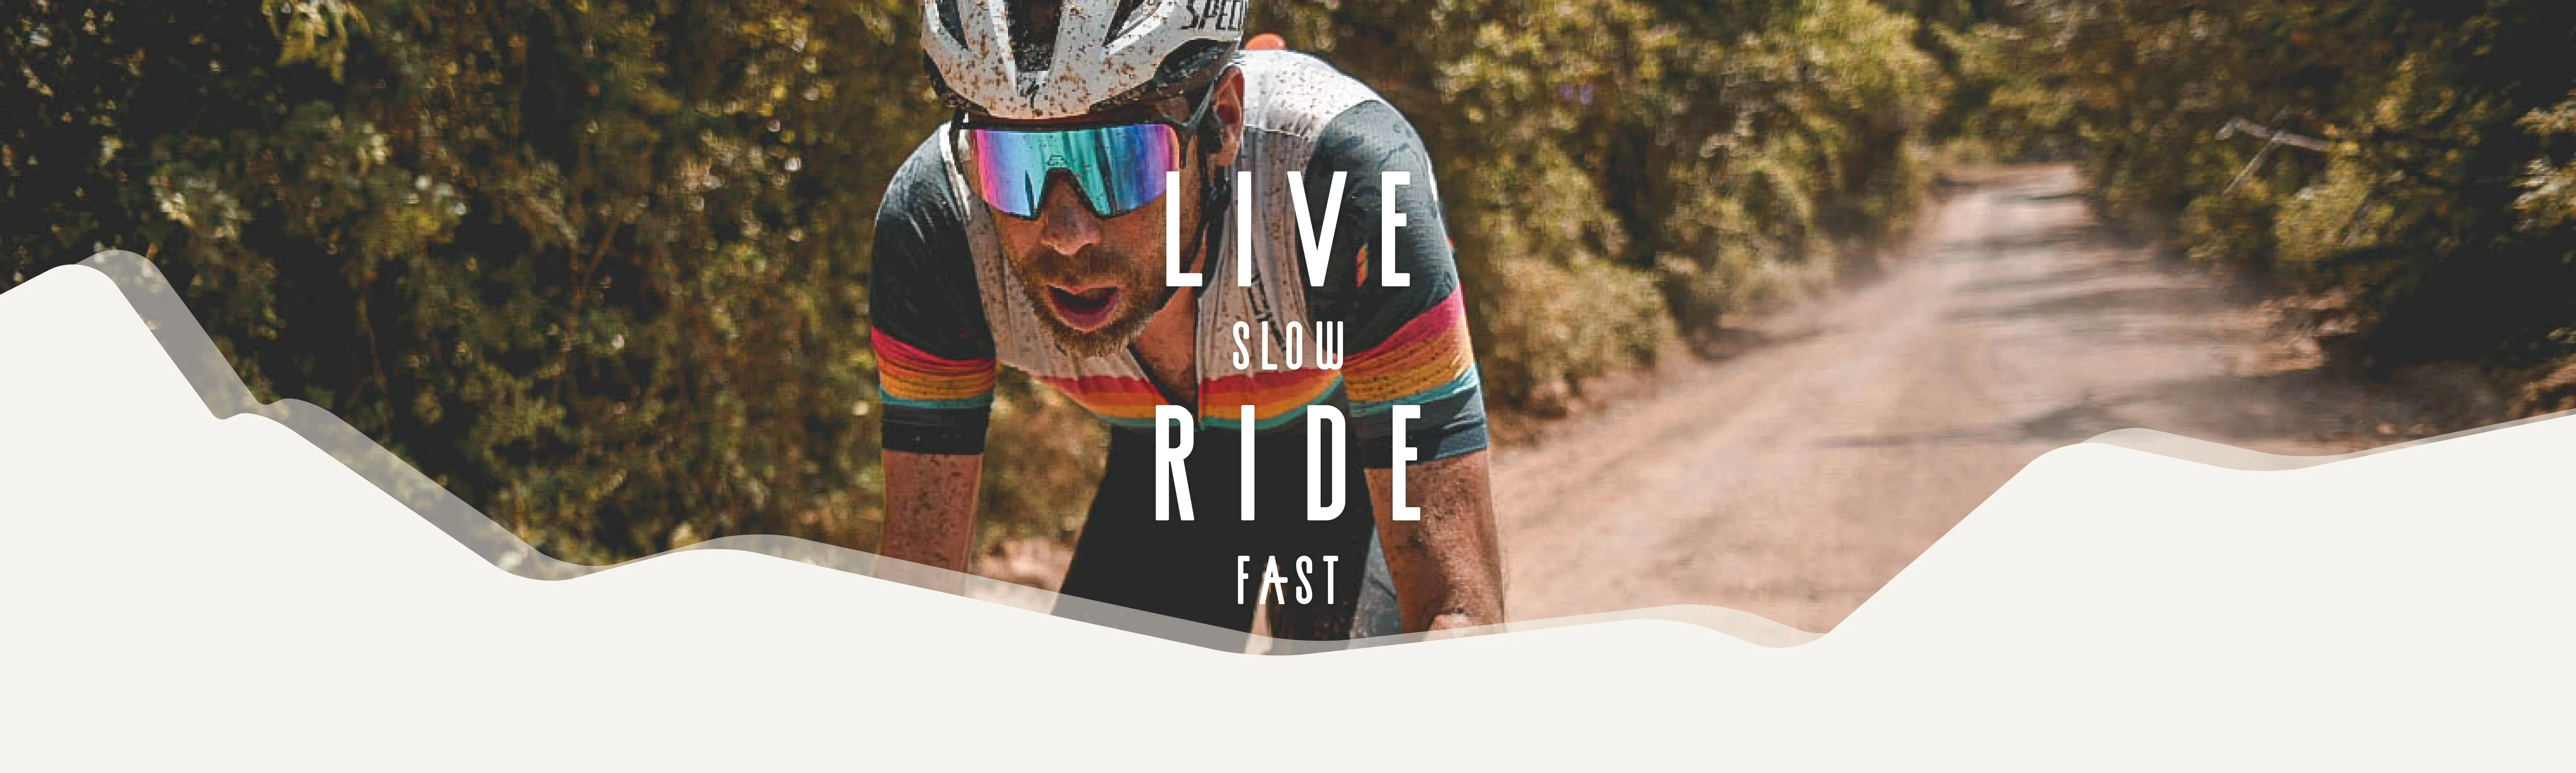 live slow ride fast